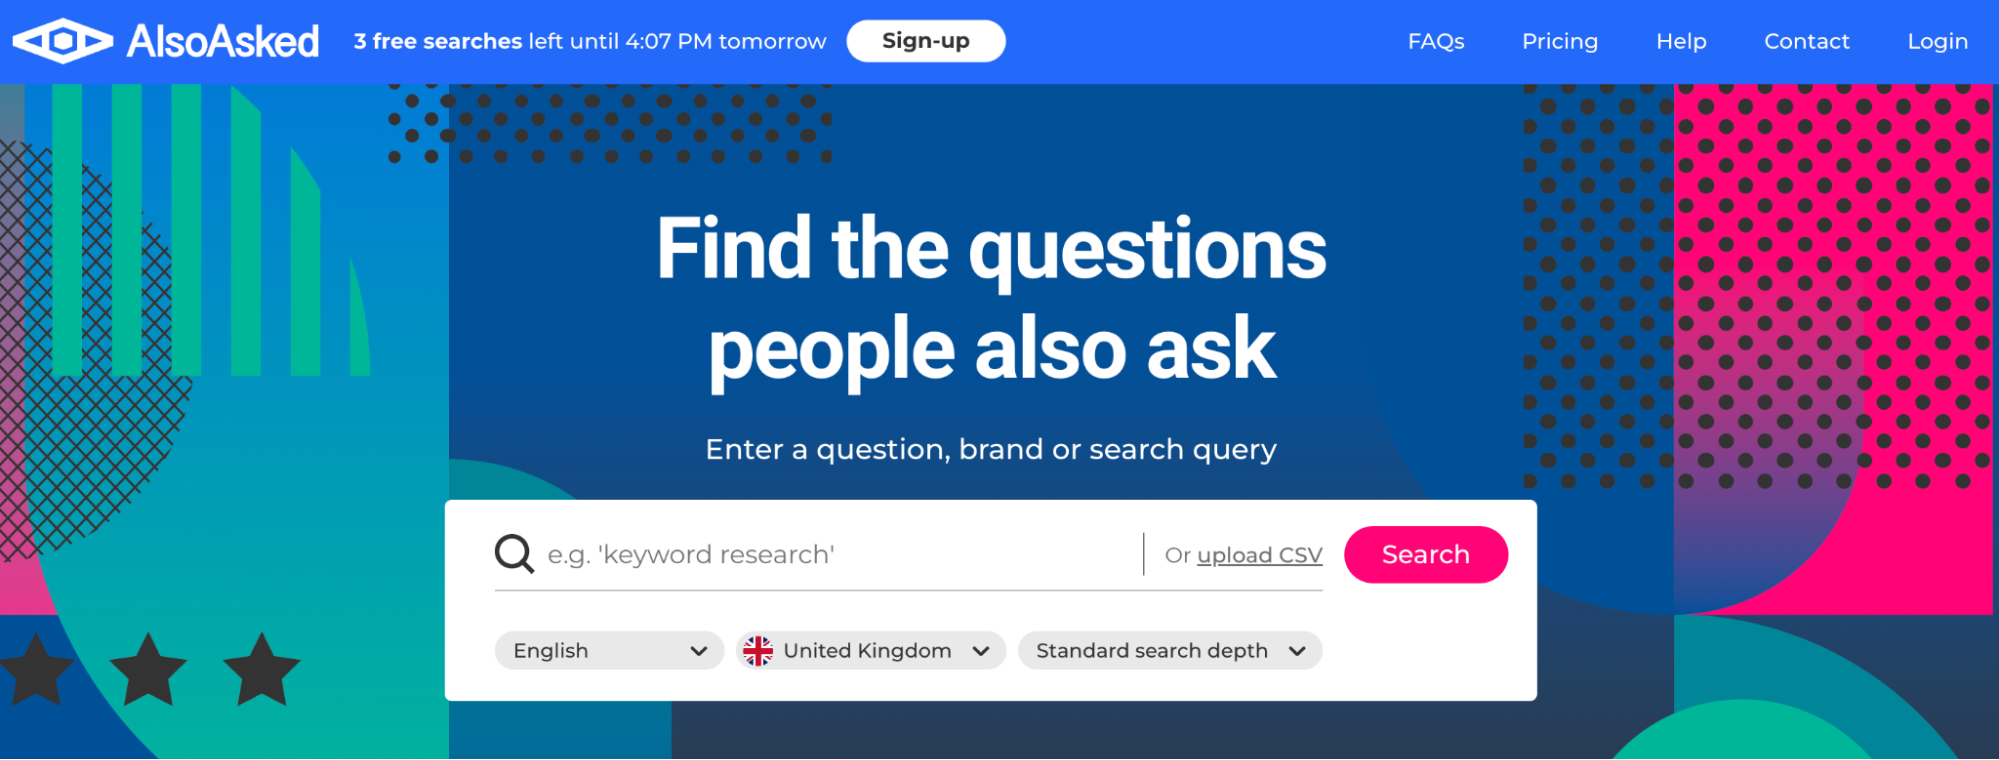 Best free keyword research tools: AlsoAsked.